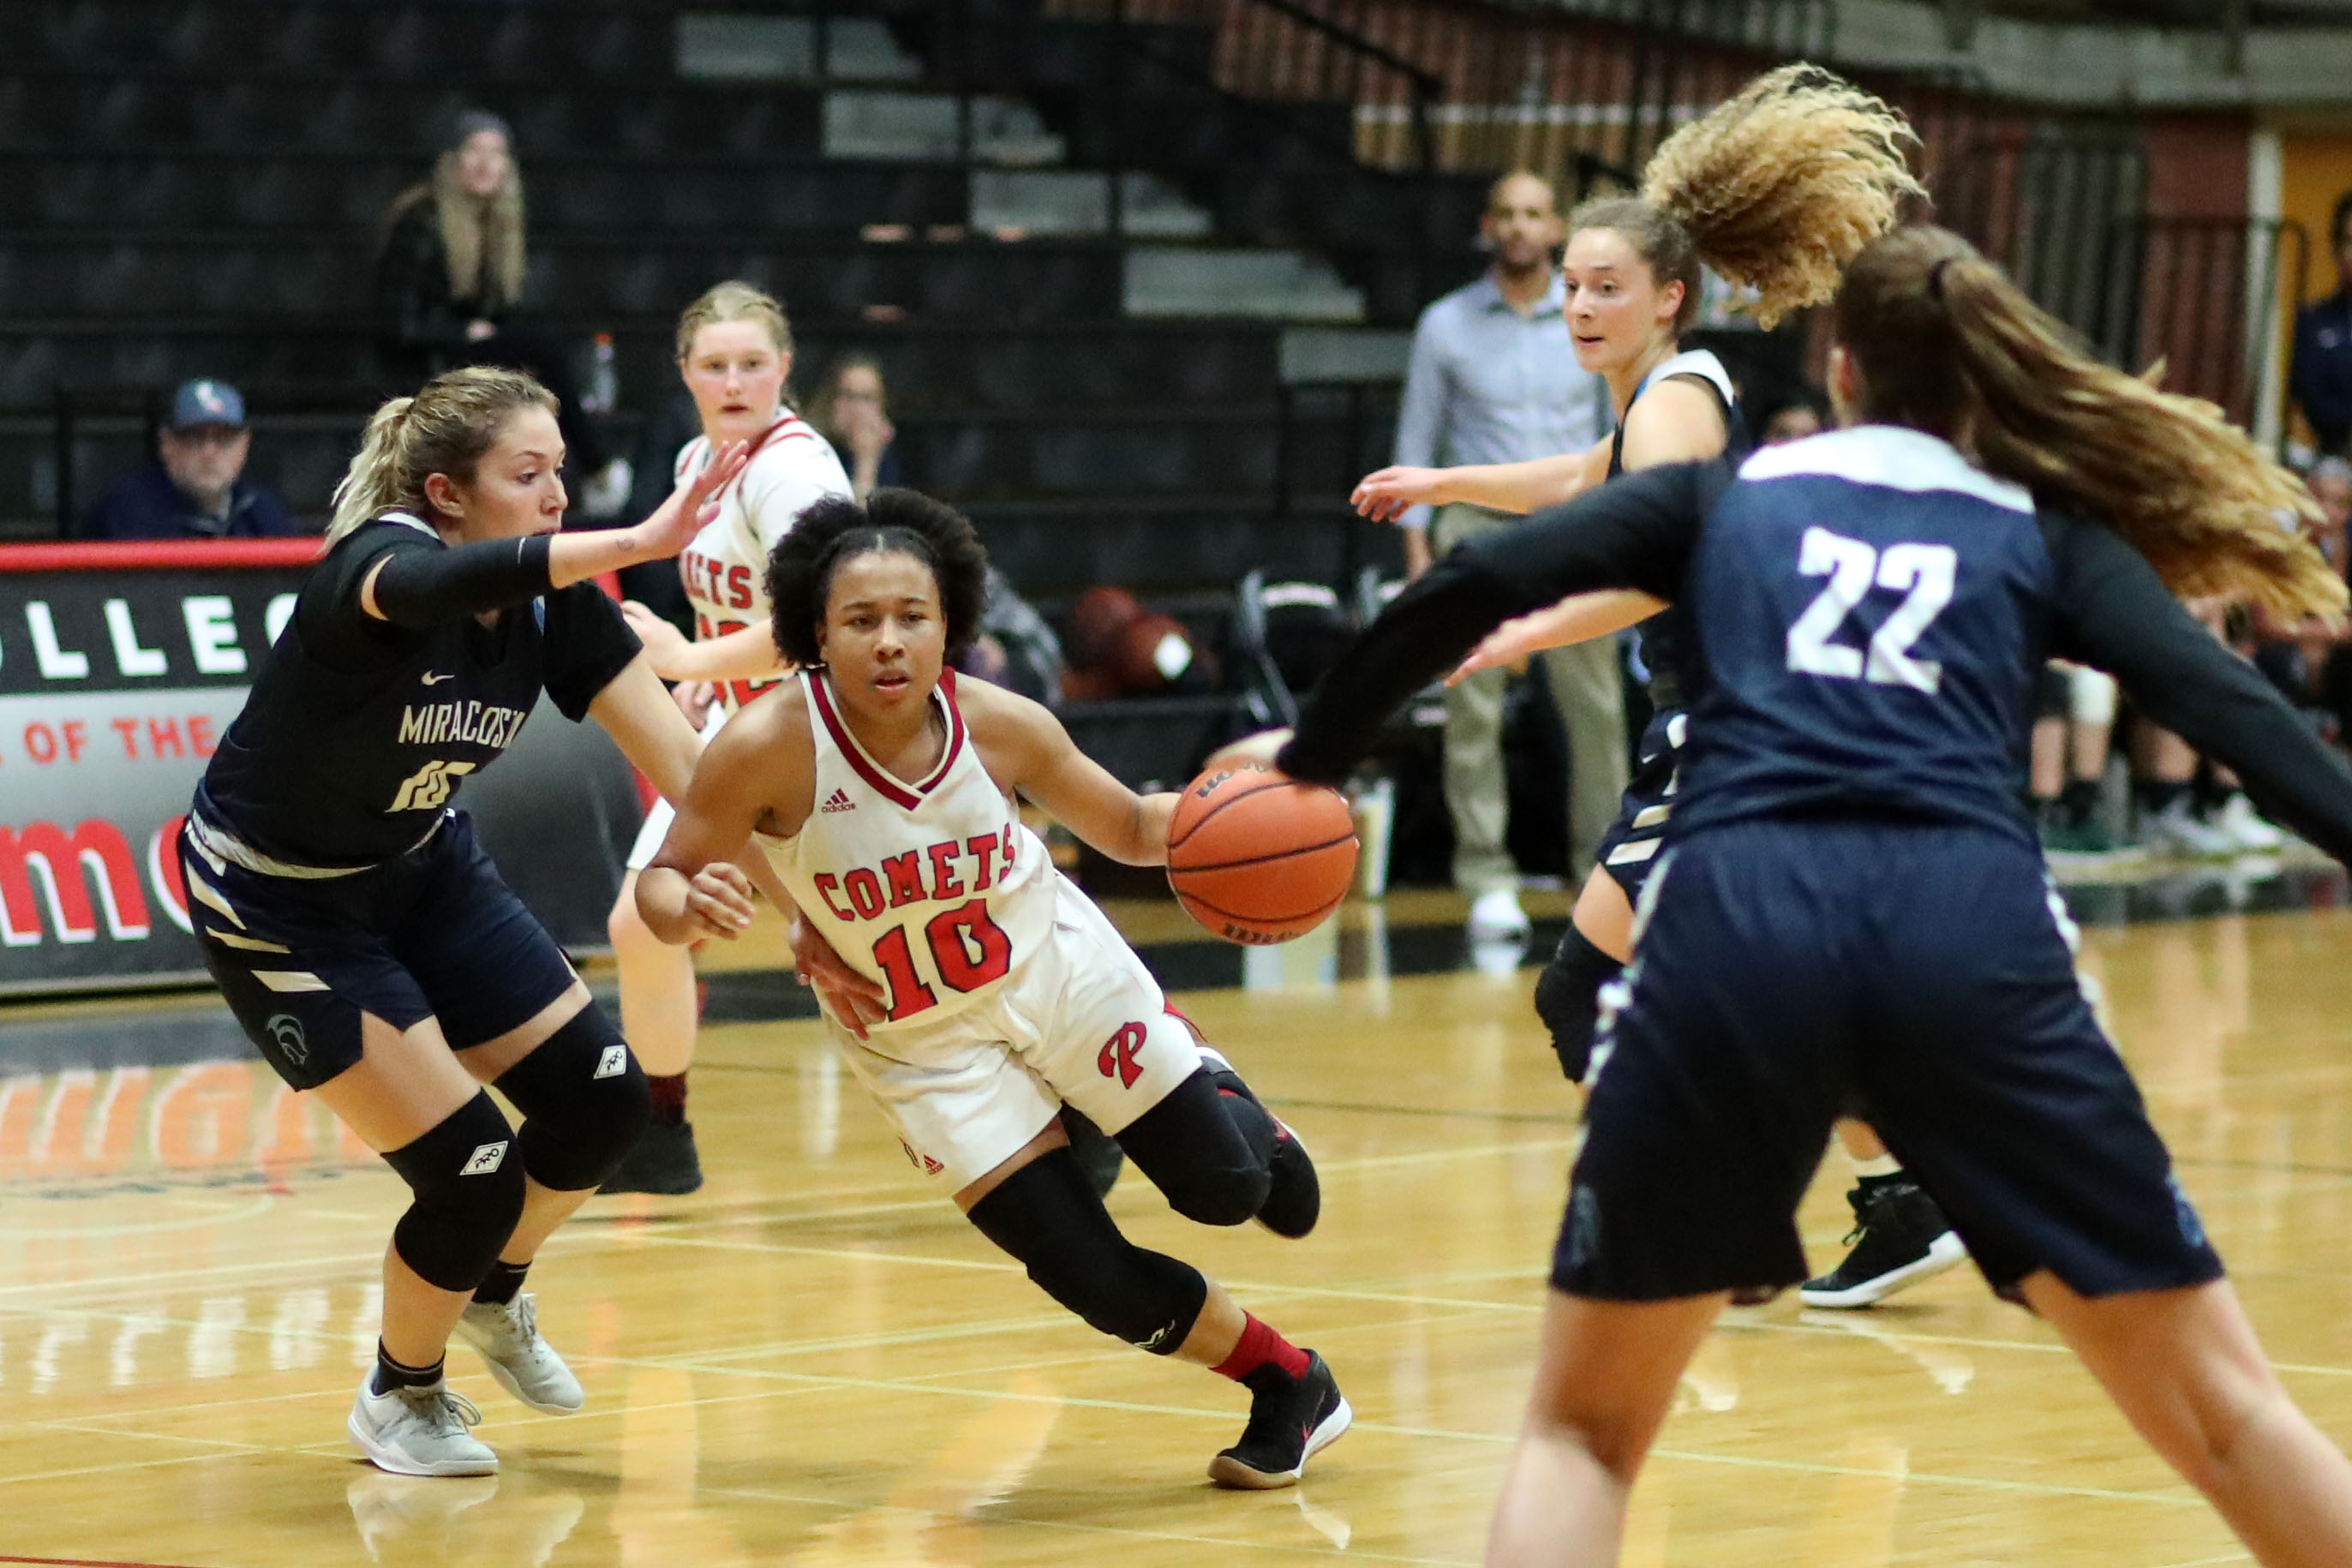 A female Palomar basketball player runs between three opposing players while dribbling a basketball in her left hand.